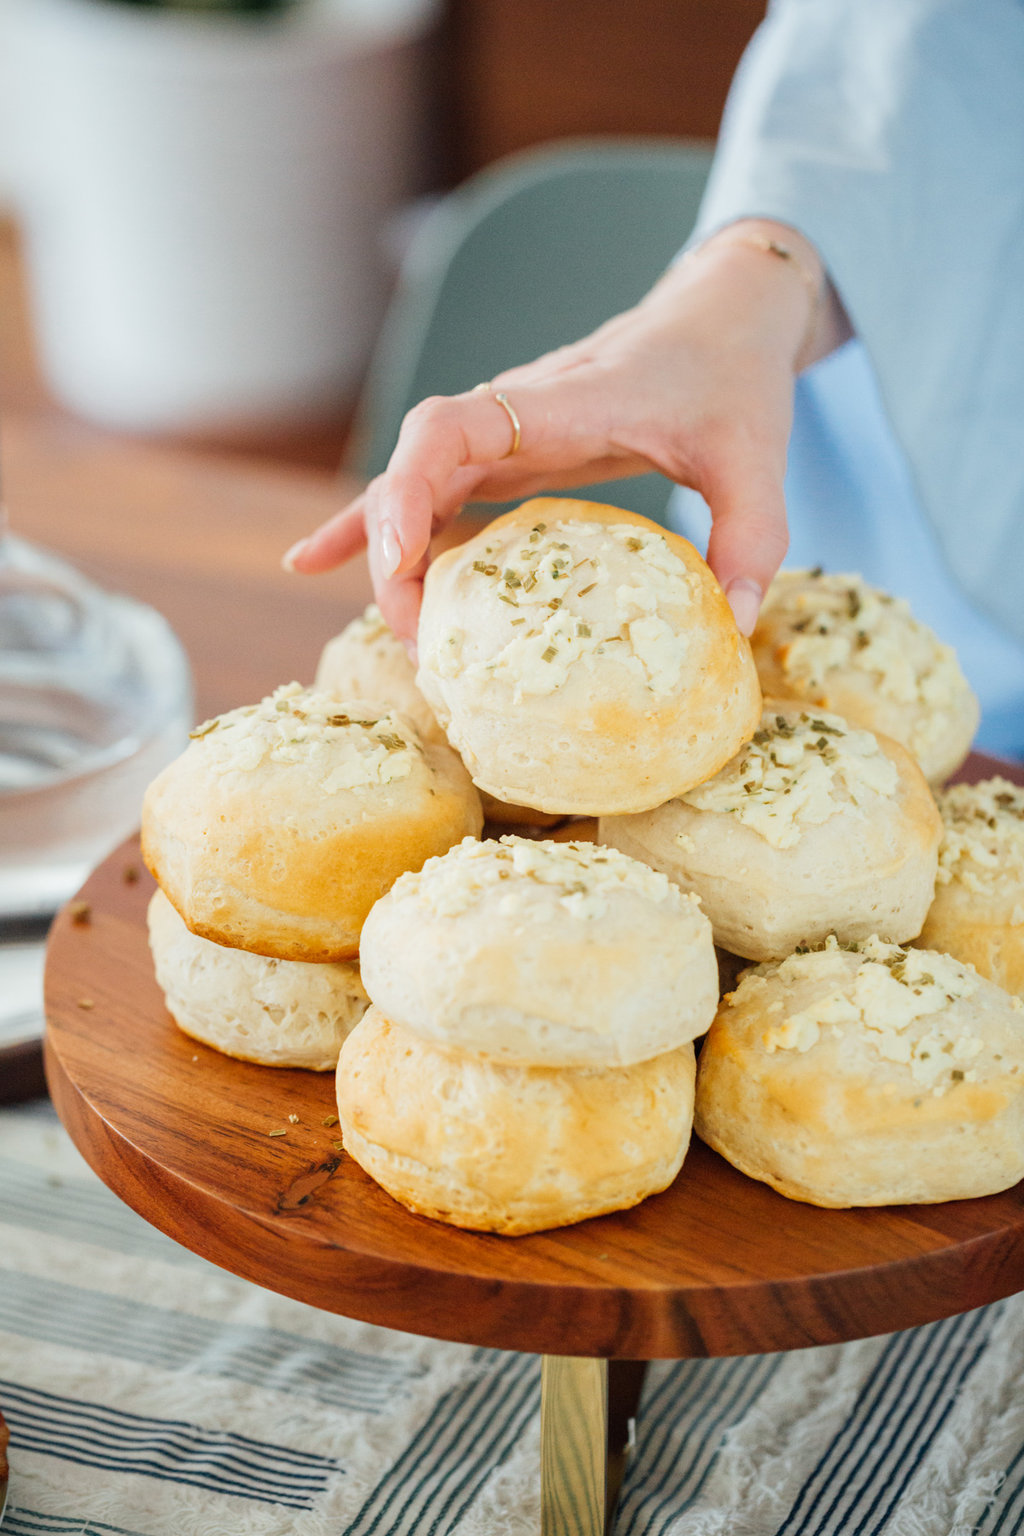 Garlic Cheese Biscuits Recipe with Boursin Cheese by Sugar & Cloth